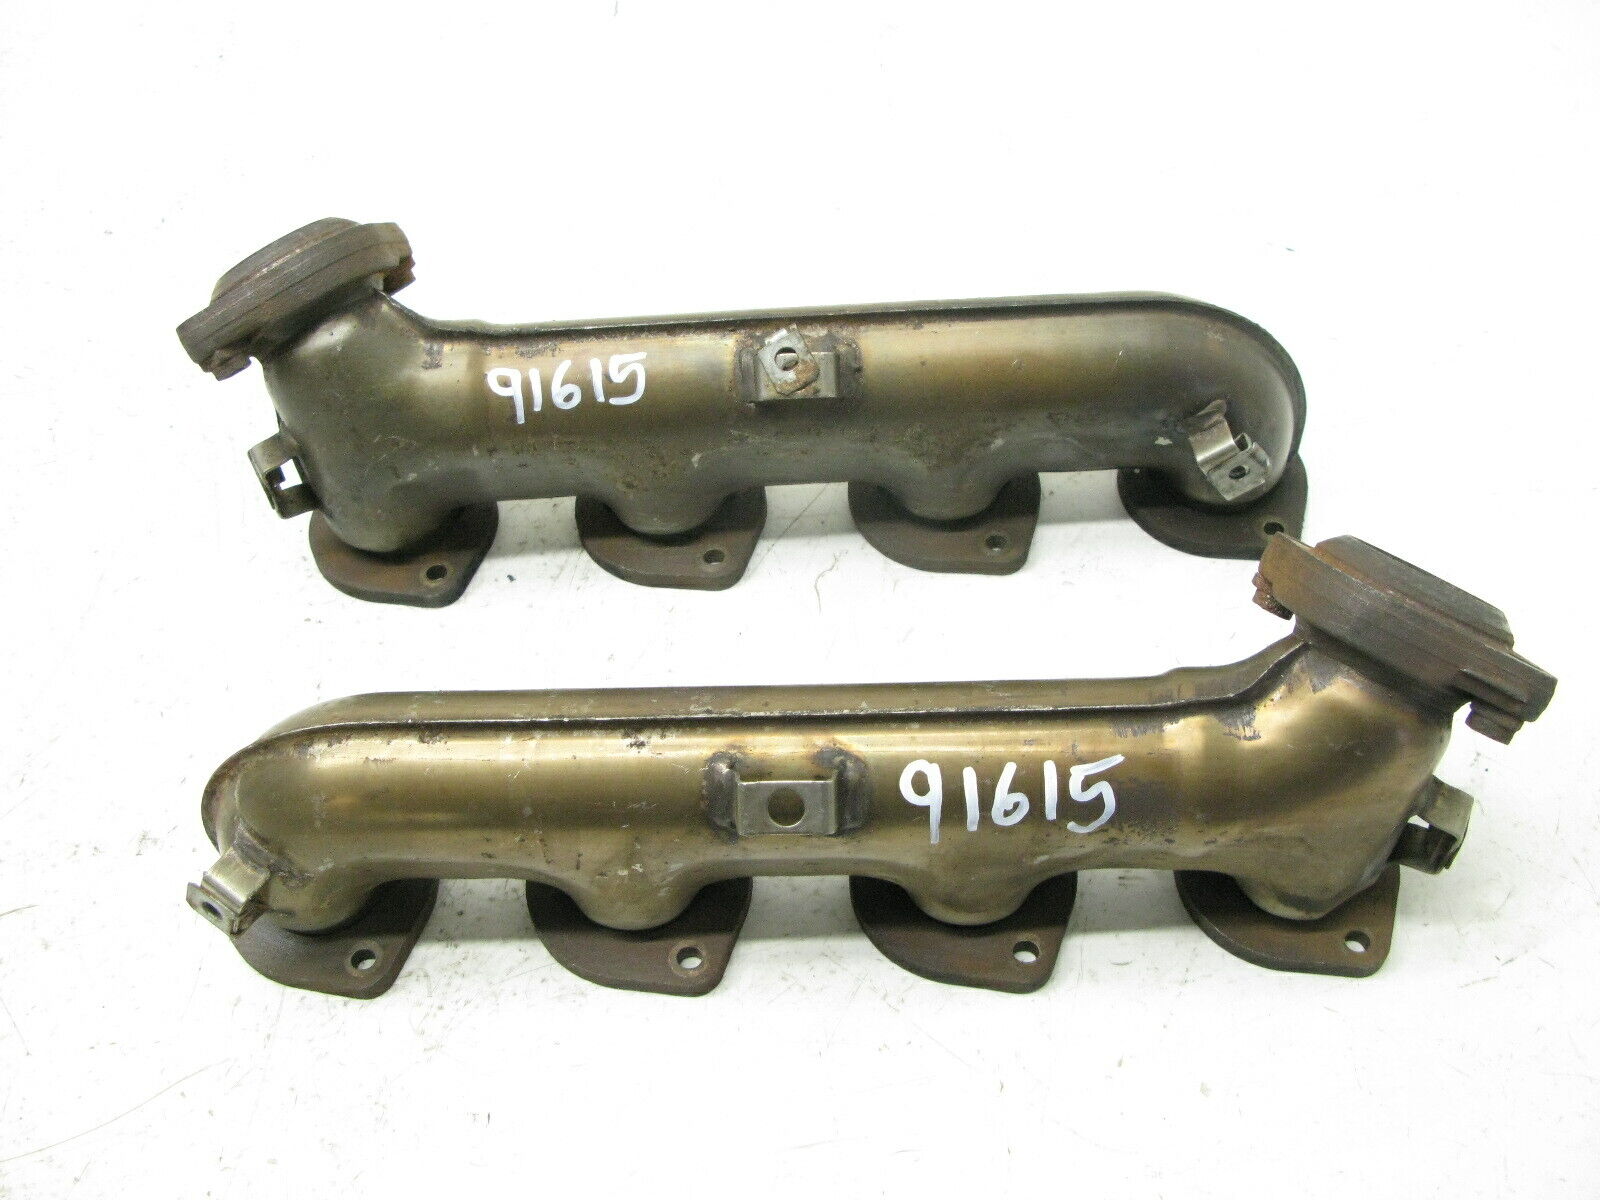 04-06 MERCEDES W220 S430 EXHAUST MANIFOLD HEADER LEFT RIGHT OEM 91615